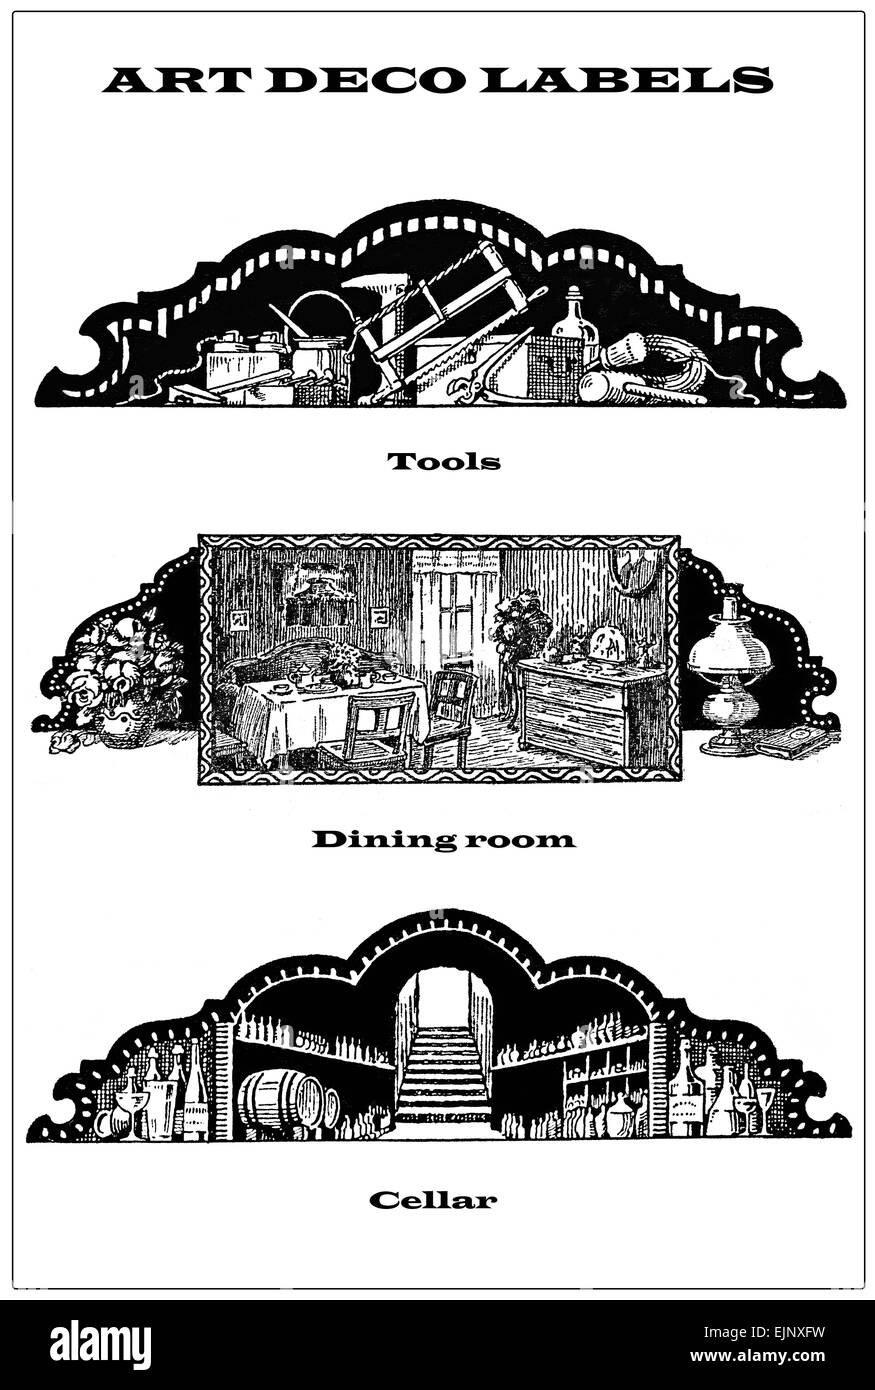 3 vintage borders - labels about homework tools, dining room and cellar Stock Photo